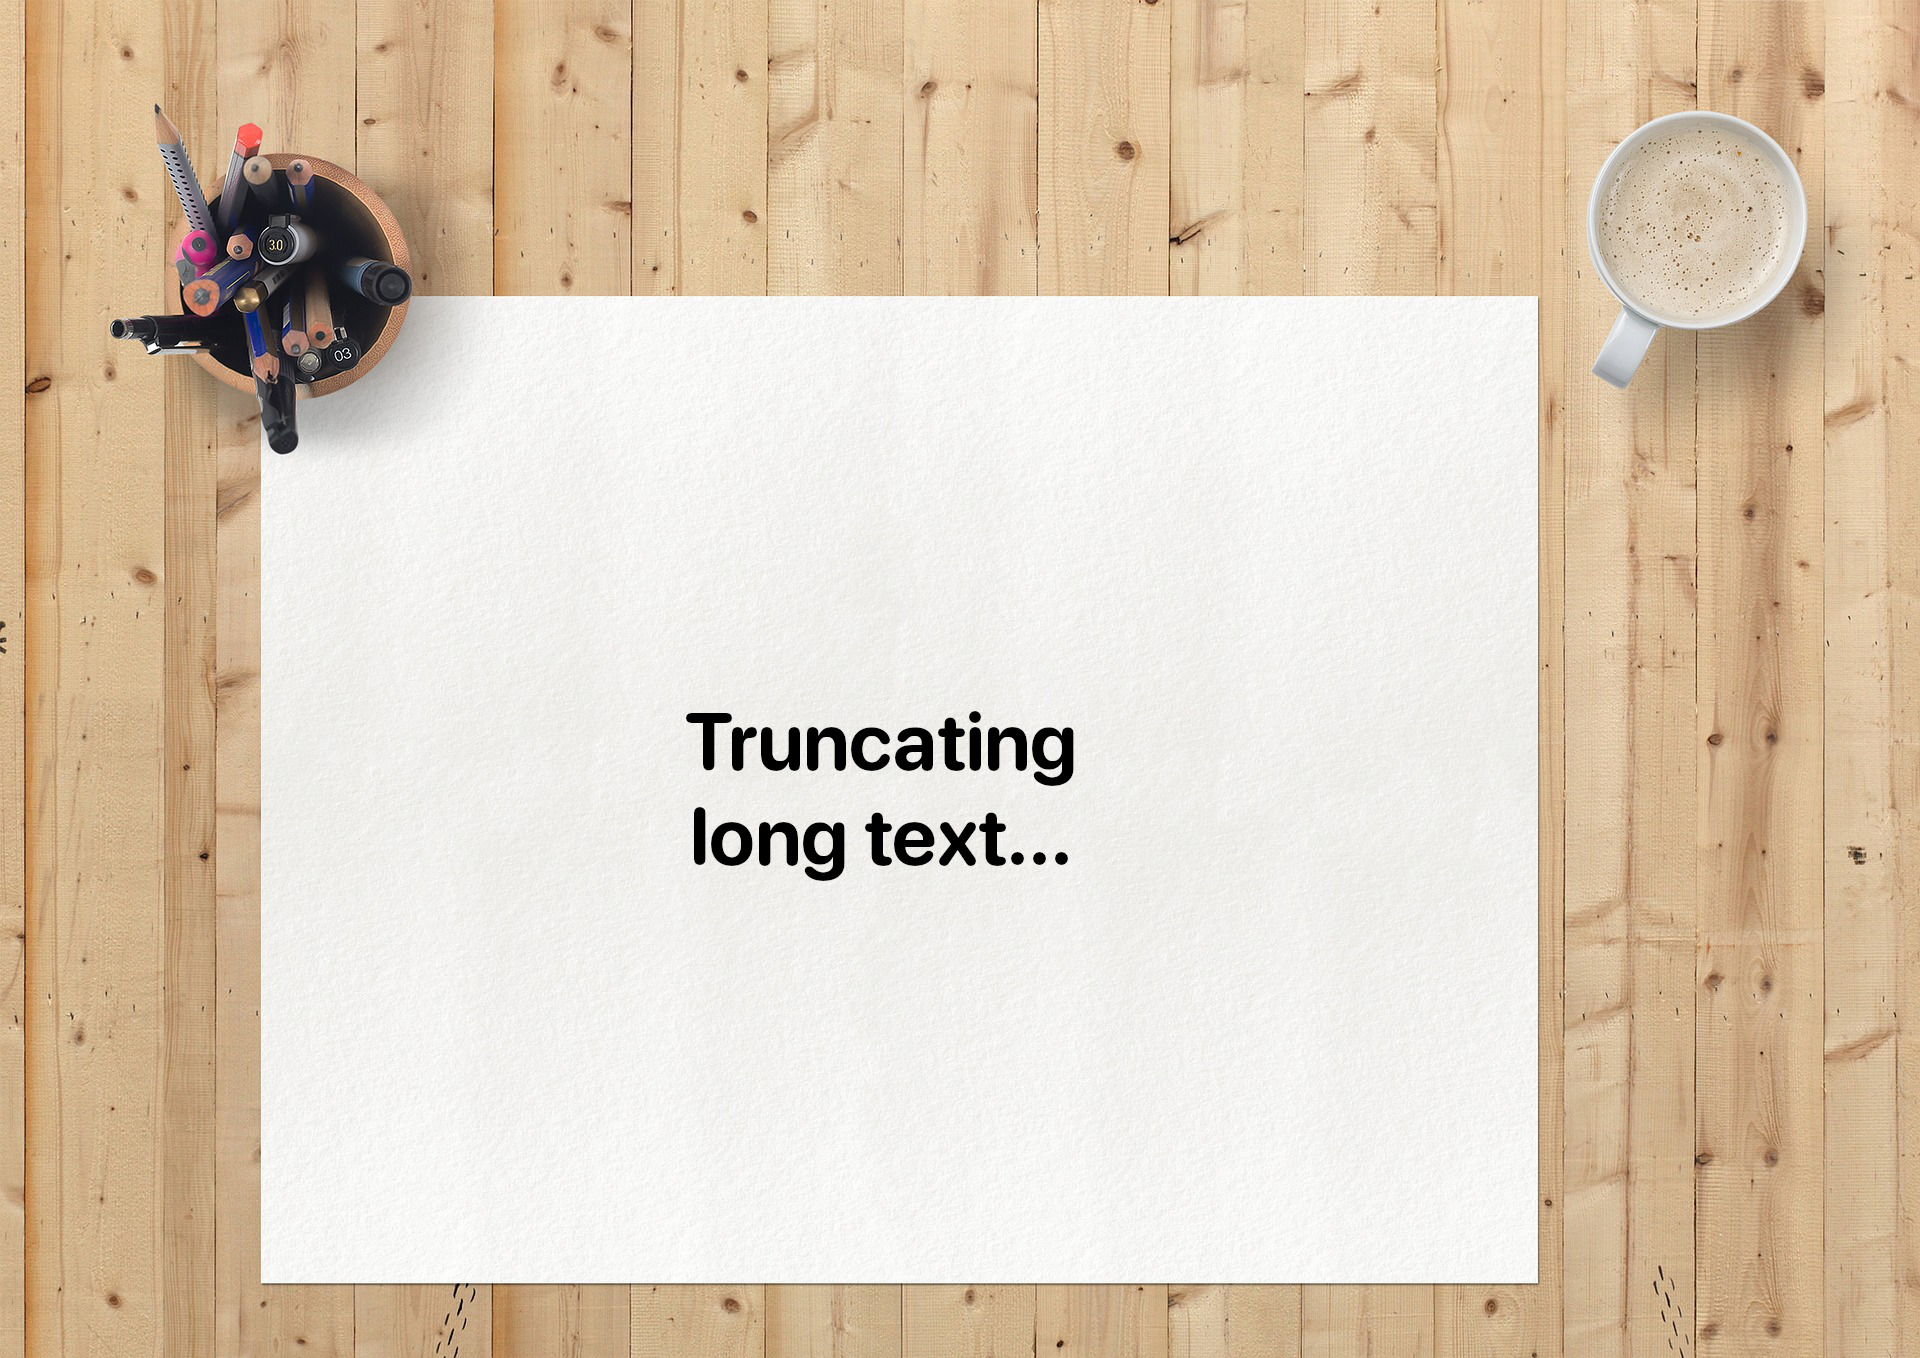 Drawing pad with text "Truncating long text"